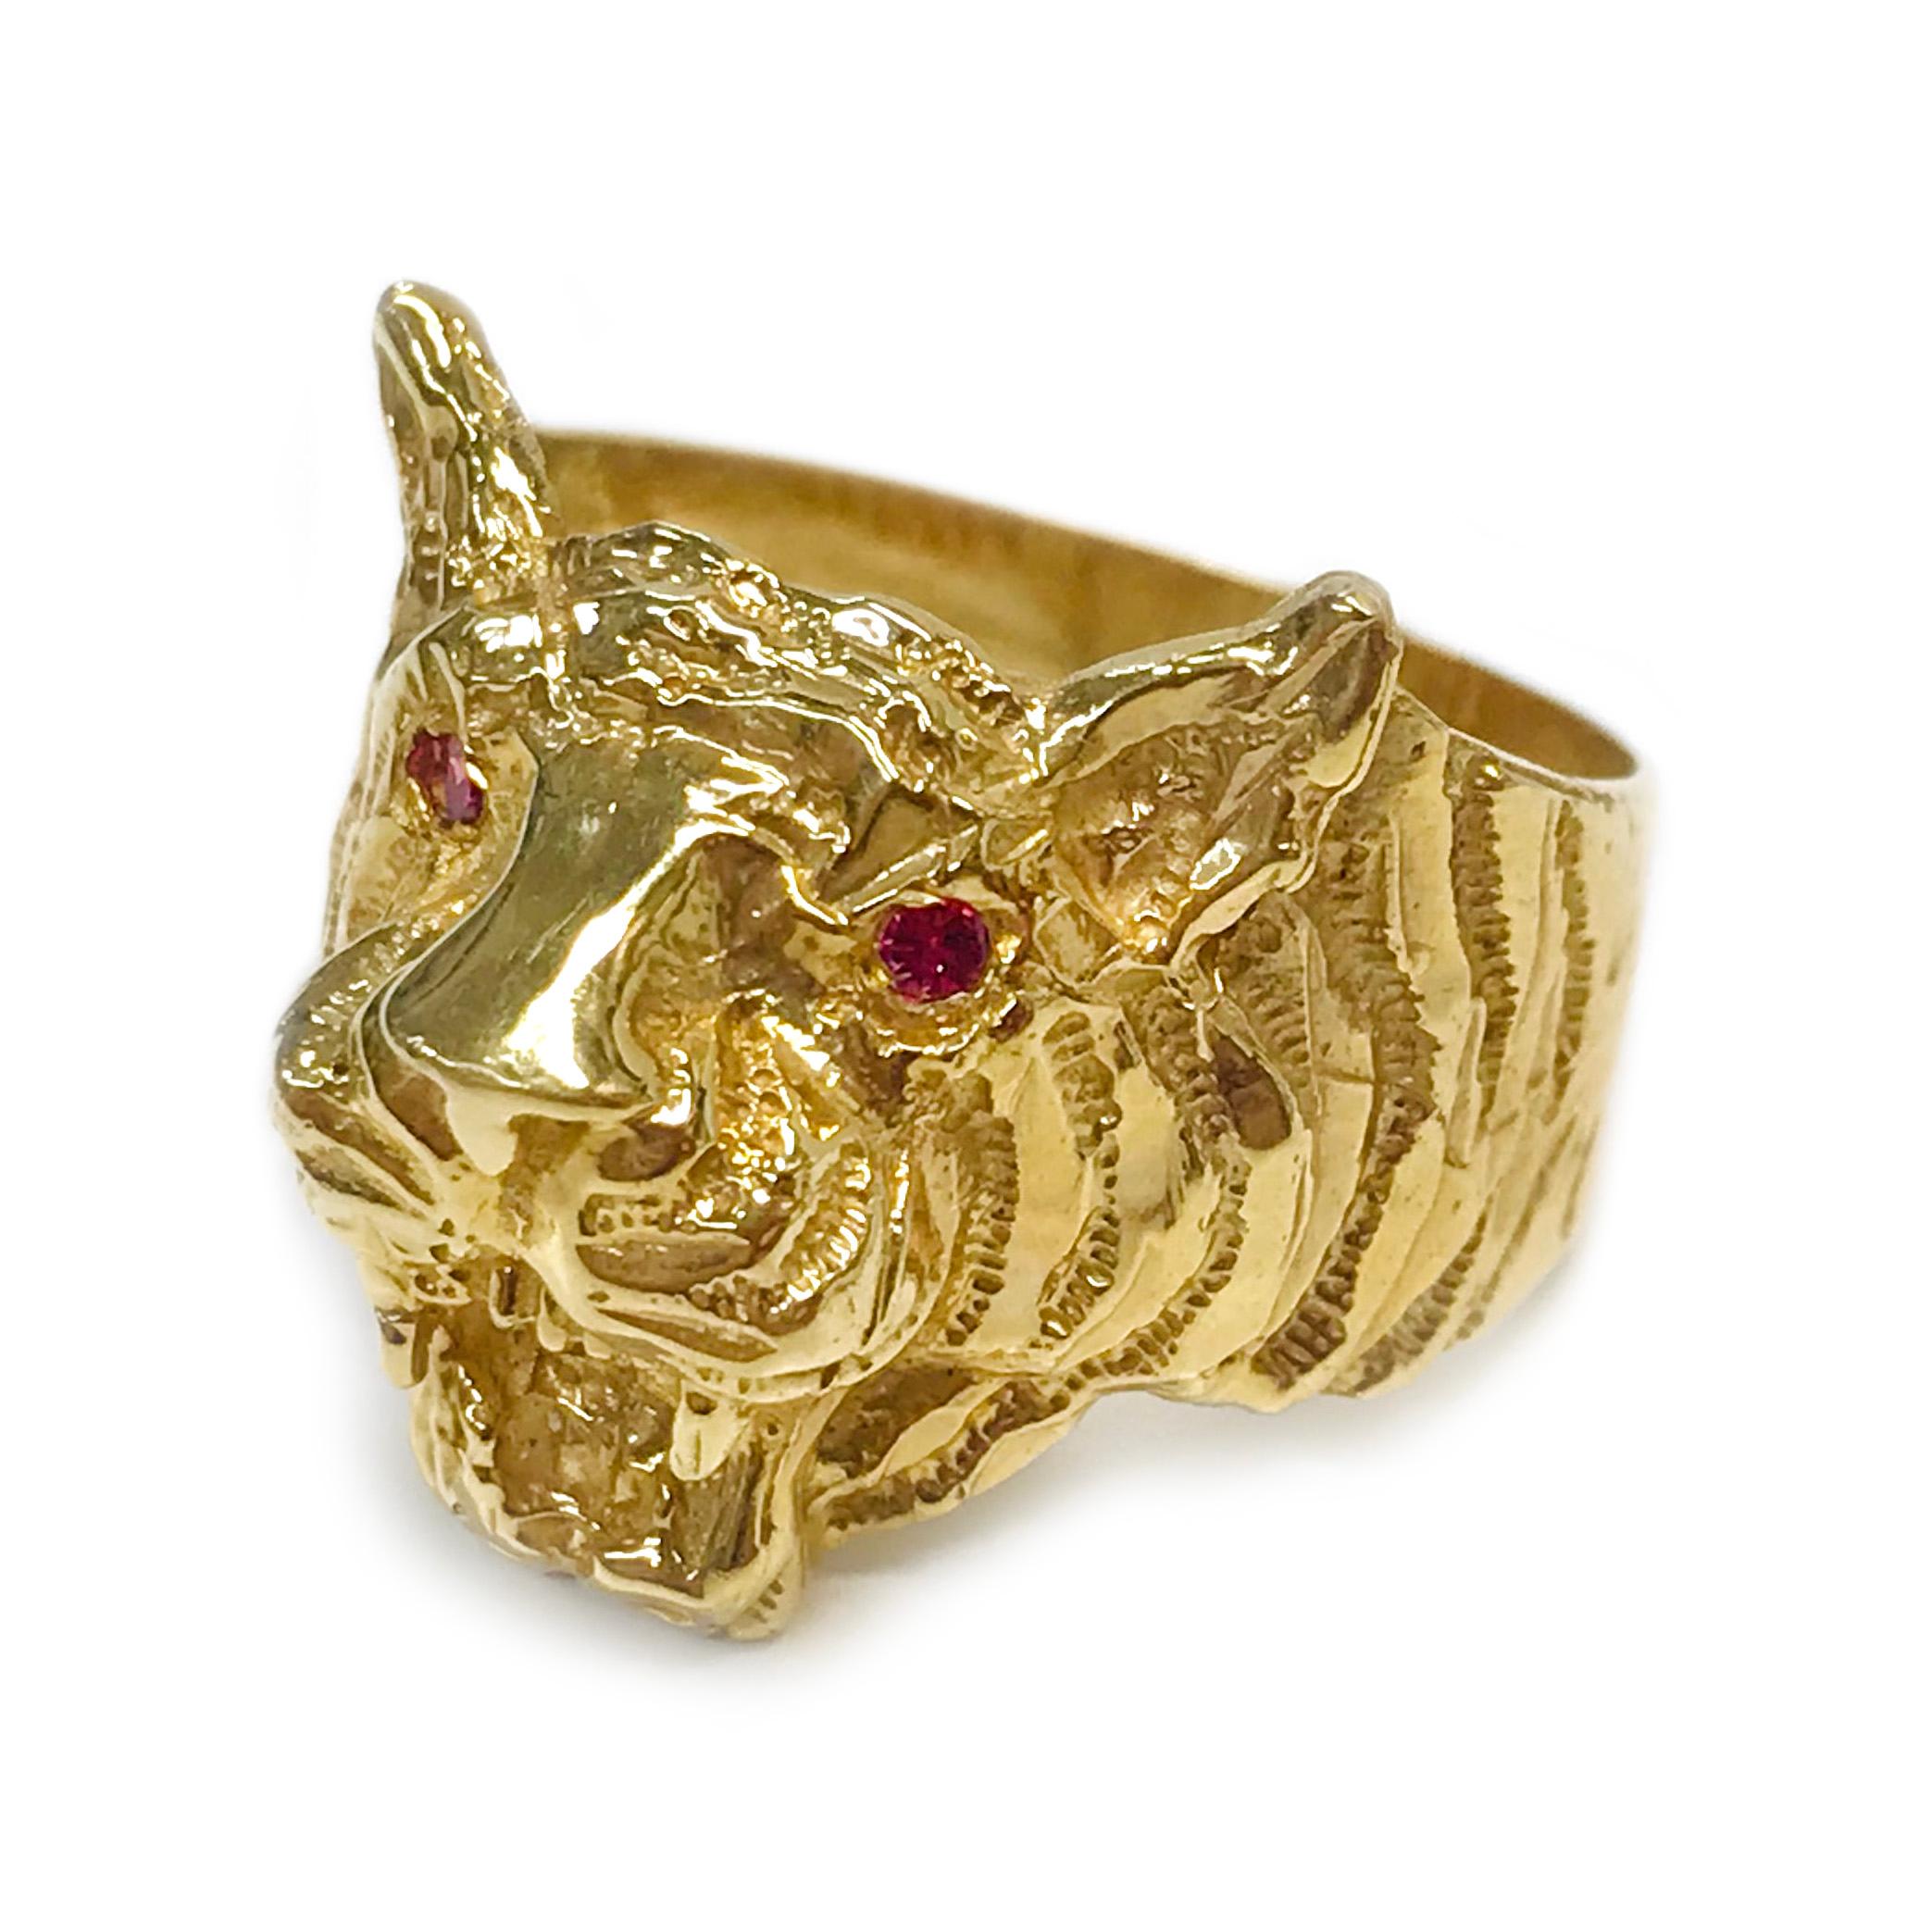 14 Karat Ruby Tiger Ring. This fantastic ring features a carved tiger face with round rubies flush-set as the eyes. The tiger stripes diminish as the face ends and the band begins and then tapers. Stamped on the inside band of the ring is 14K. The